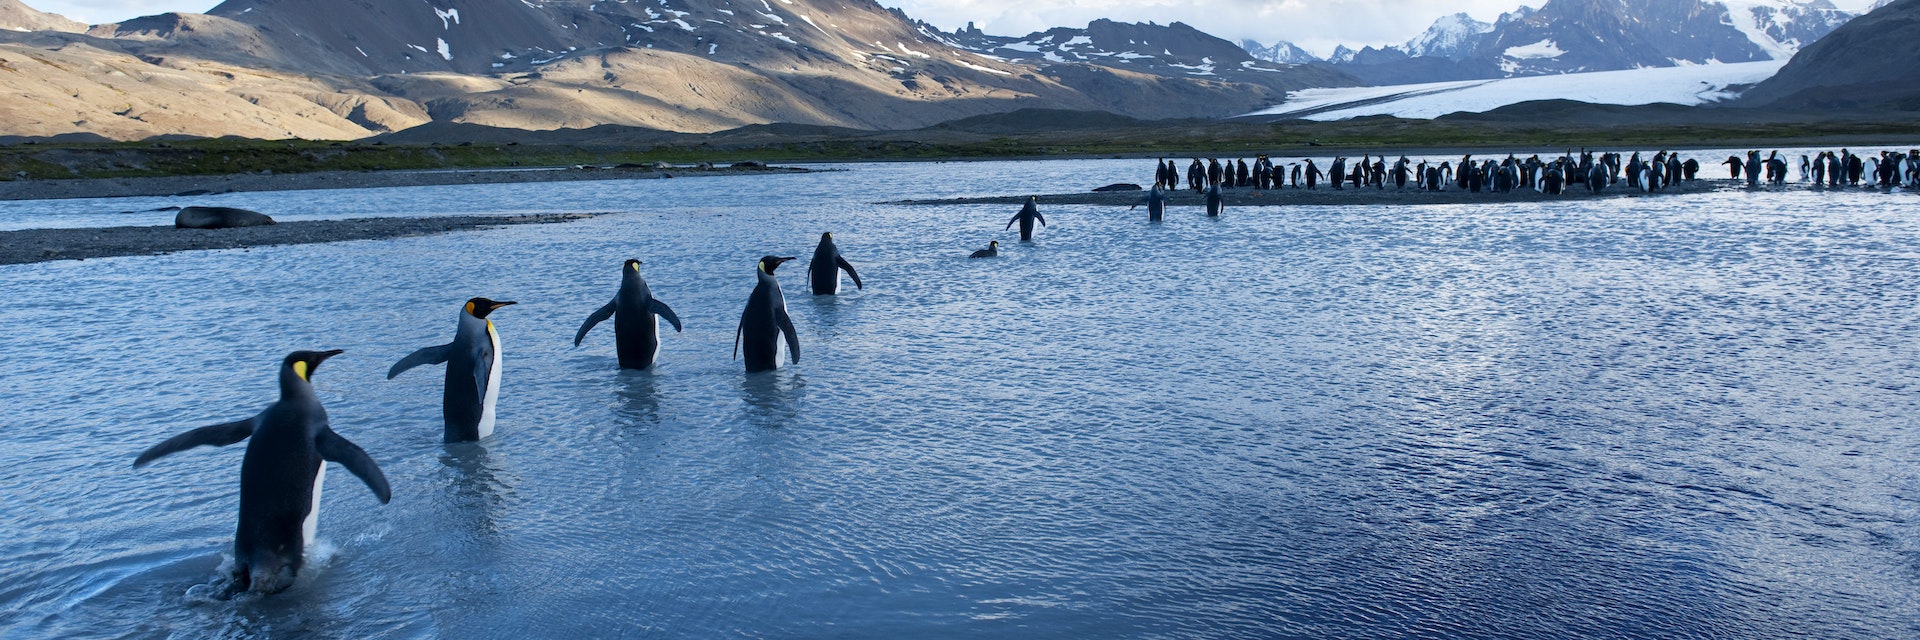 King penguins wading through shallows of Fortuna Bay.